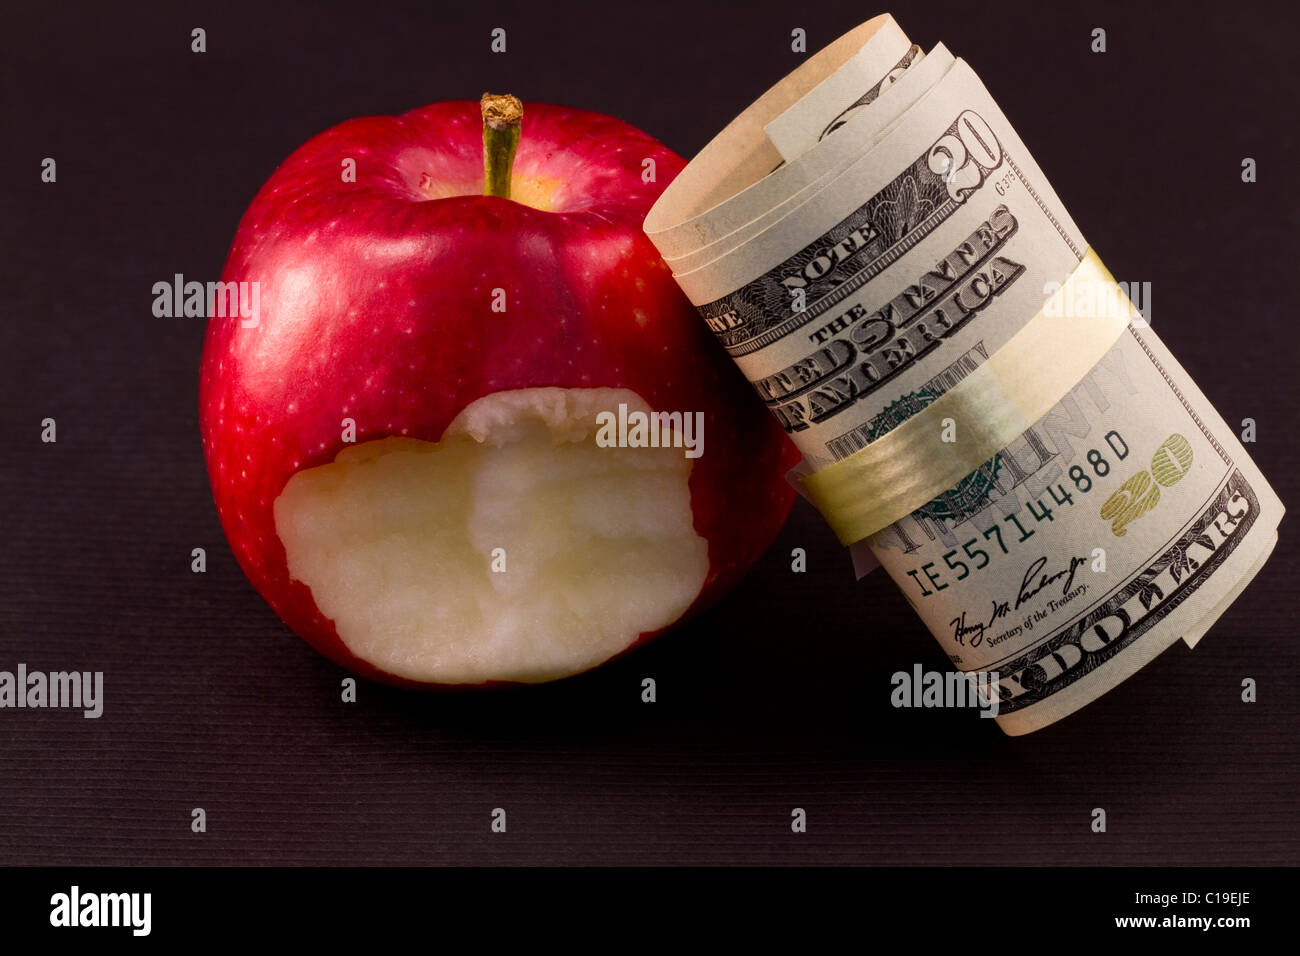 American currency leans against a red apple with a bite taken out to reflect the recession's weakened consumer. Stock Photo